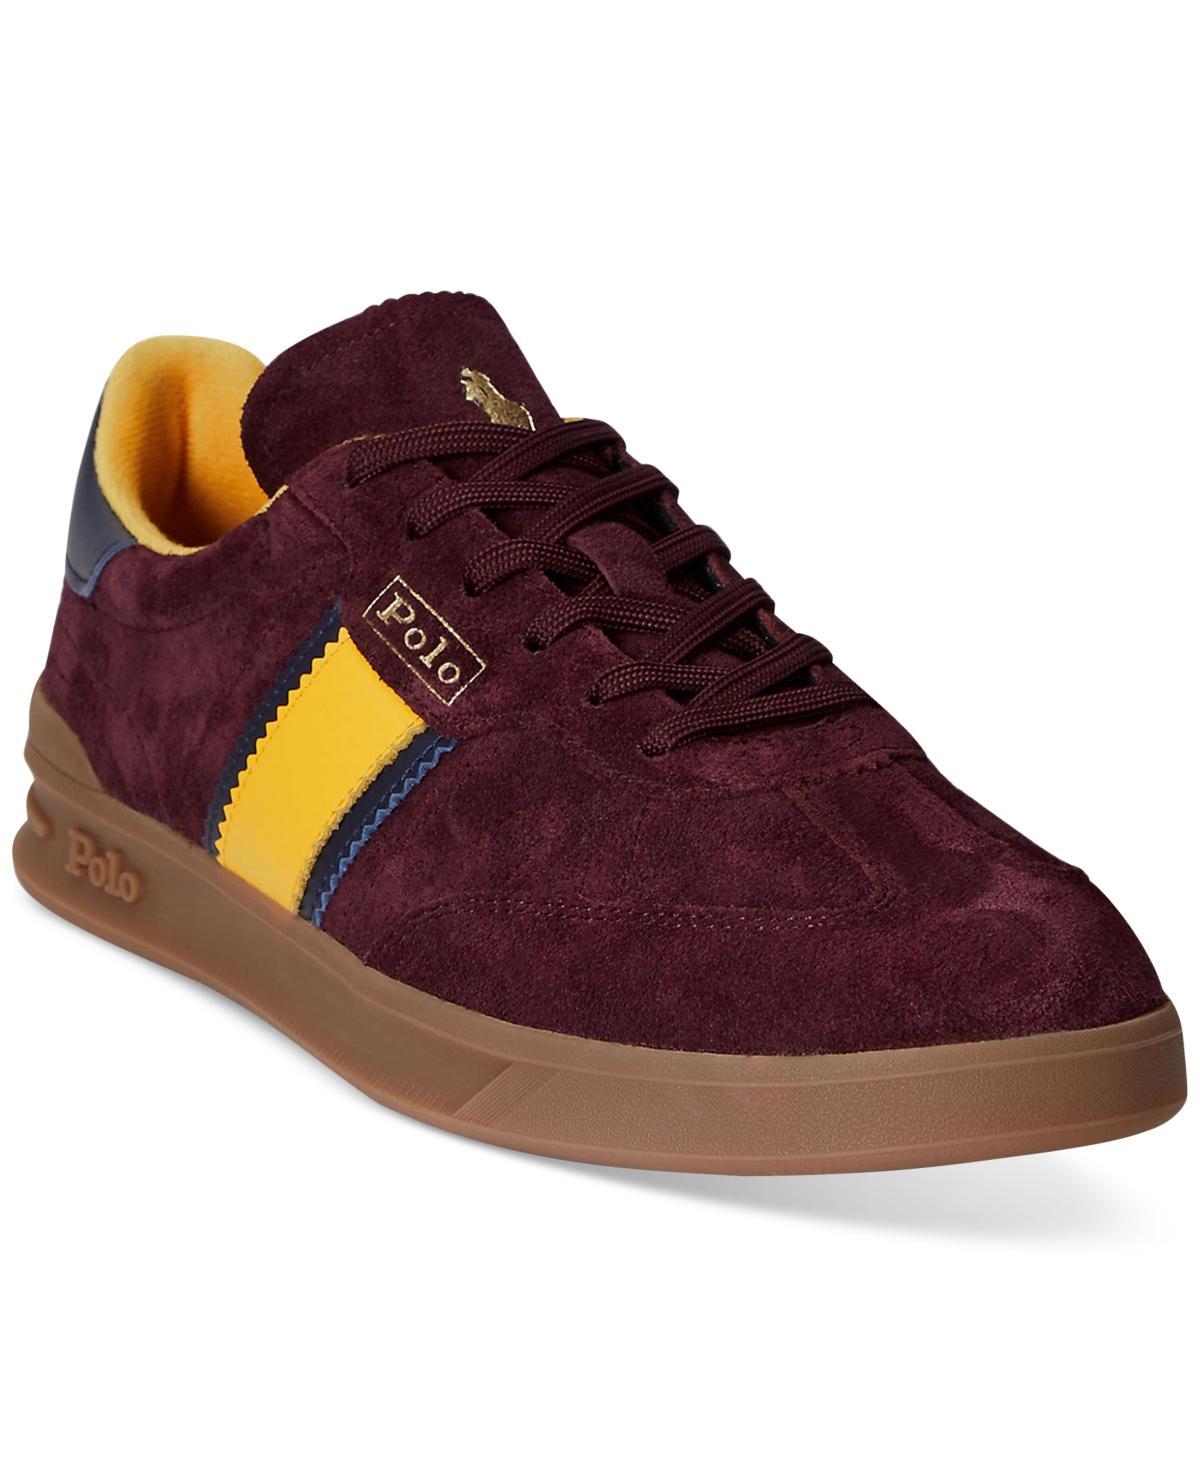 Polo Ralph Lauren Mens Heritage Aera Suede Sneakers Product Image